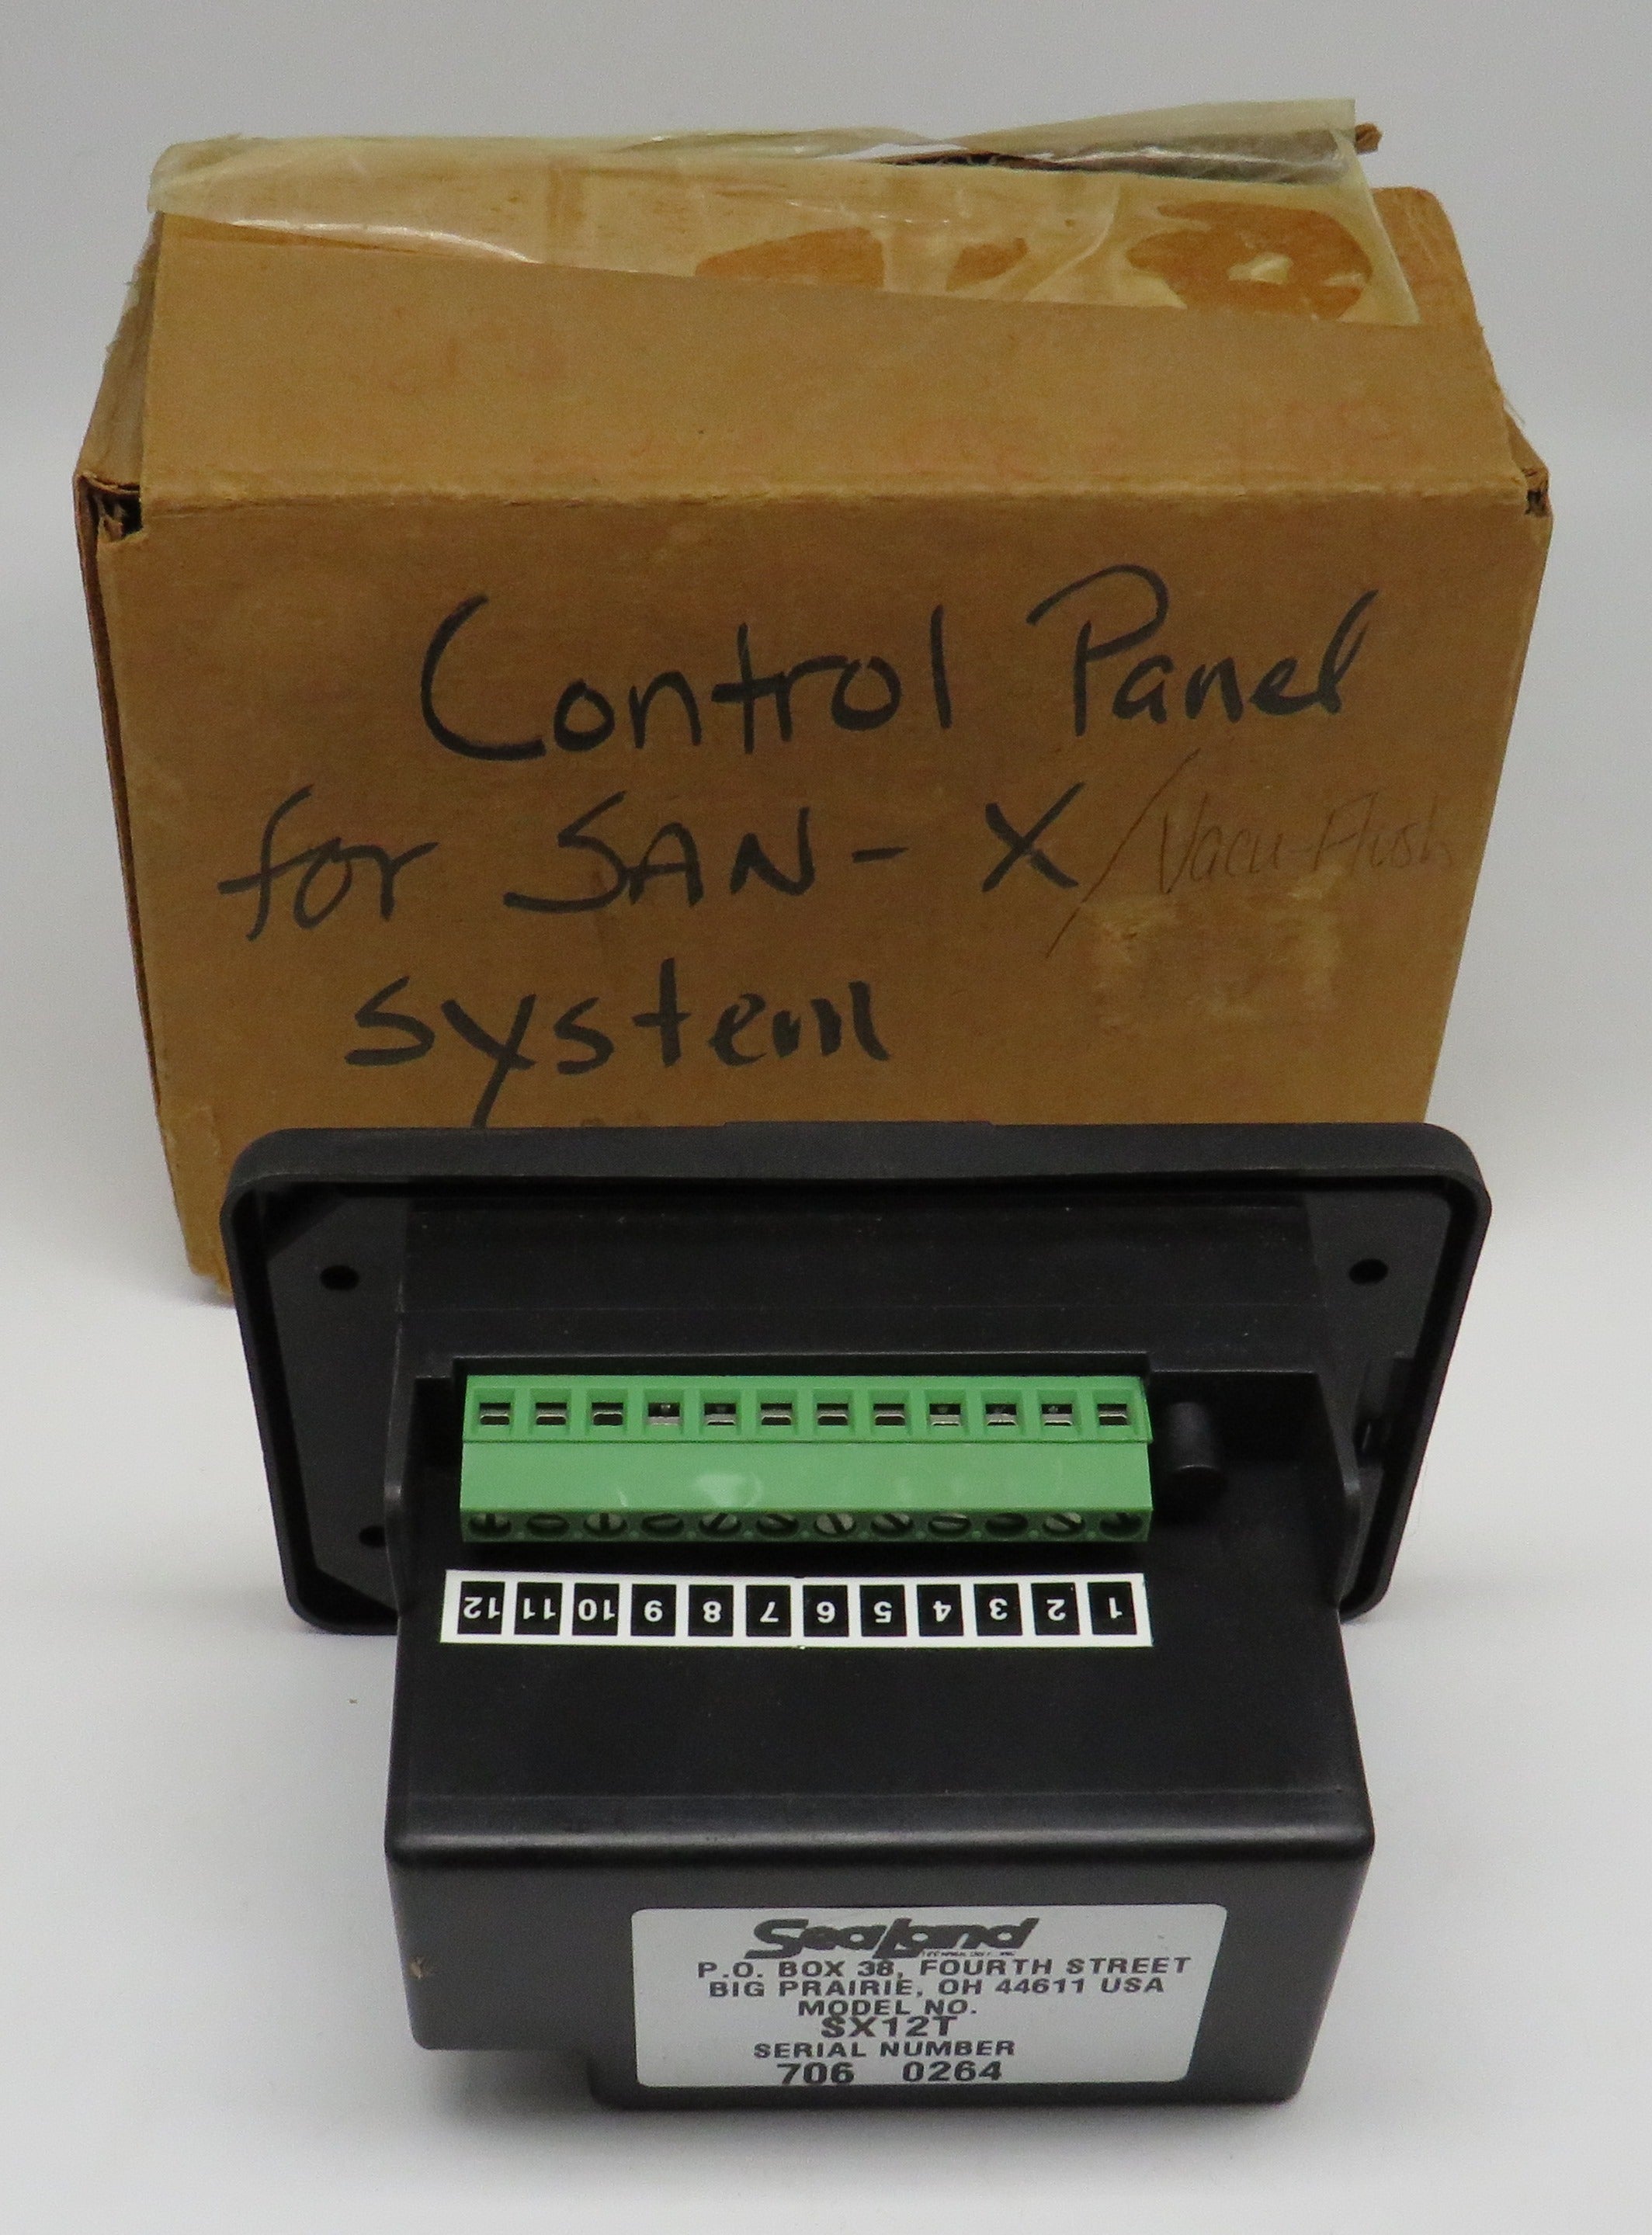 381230299 Sealand Dometic Control Panel for San-X/Vacuu-Flush System OBSOLETE